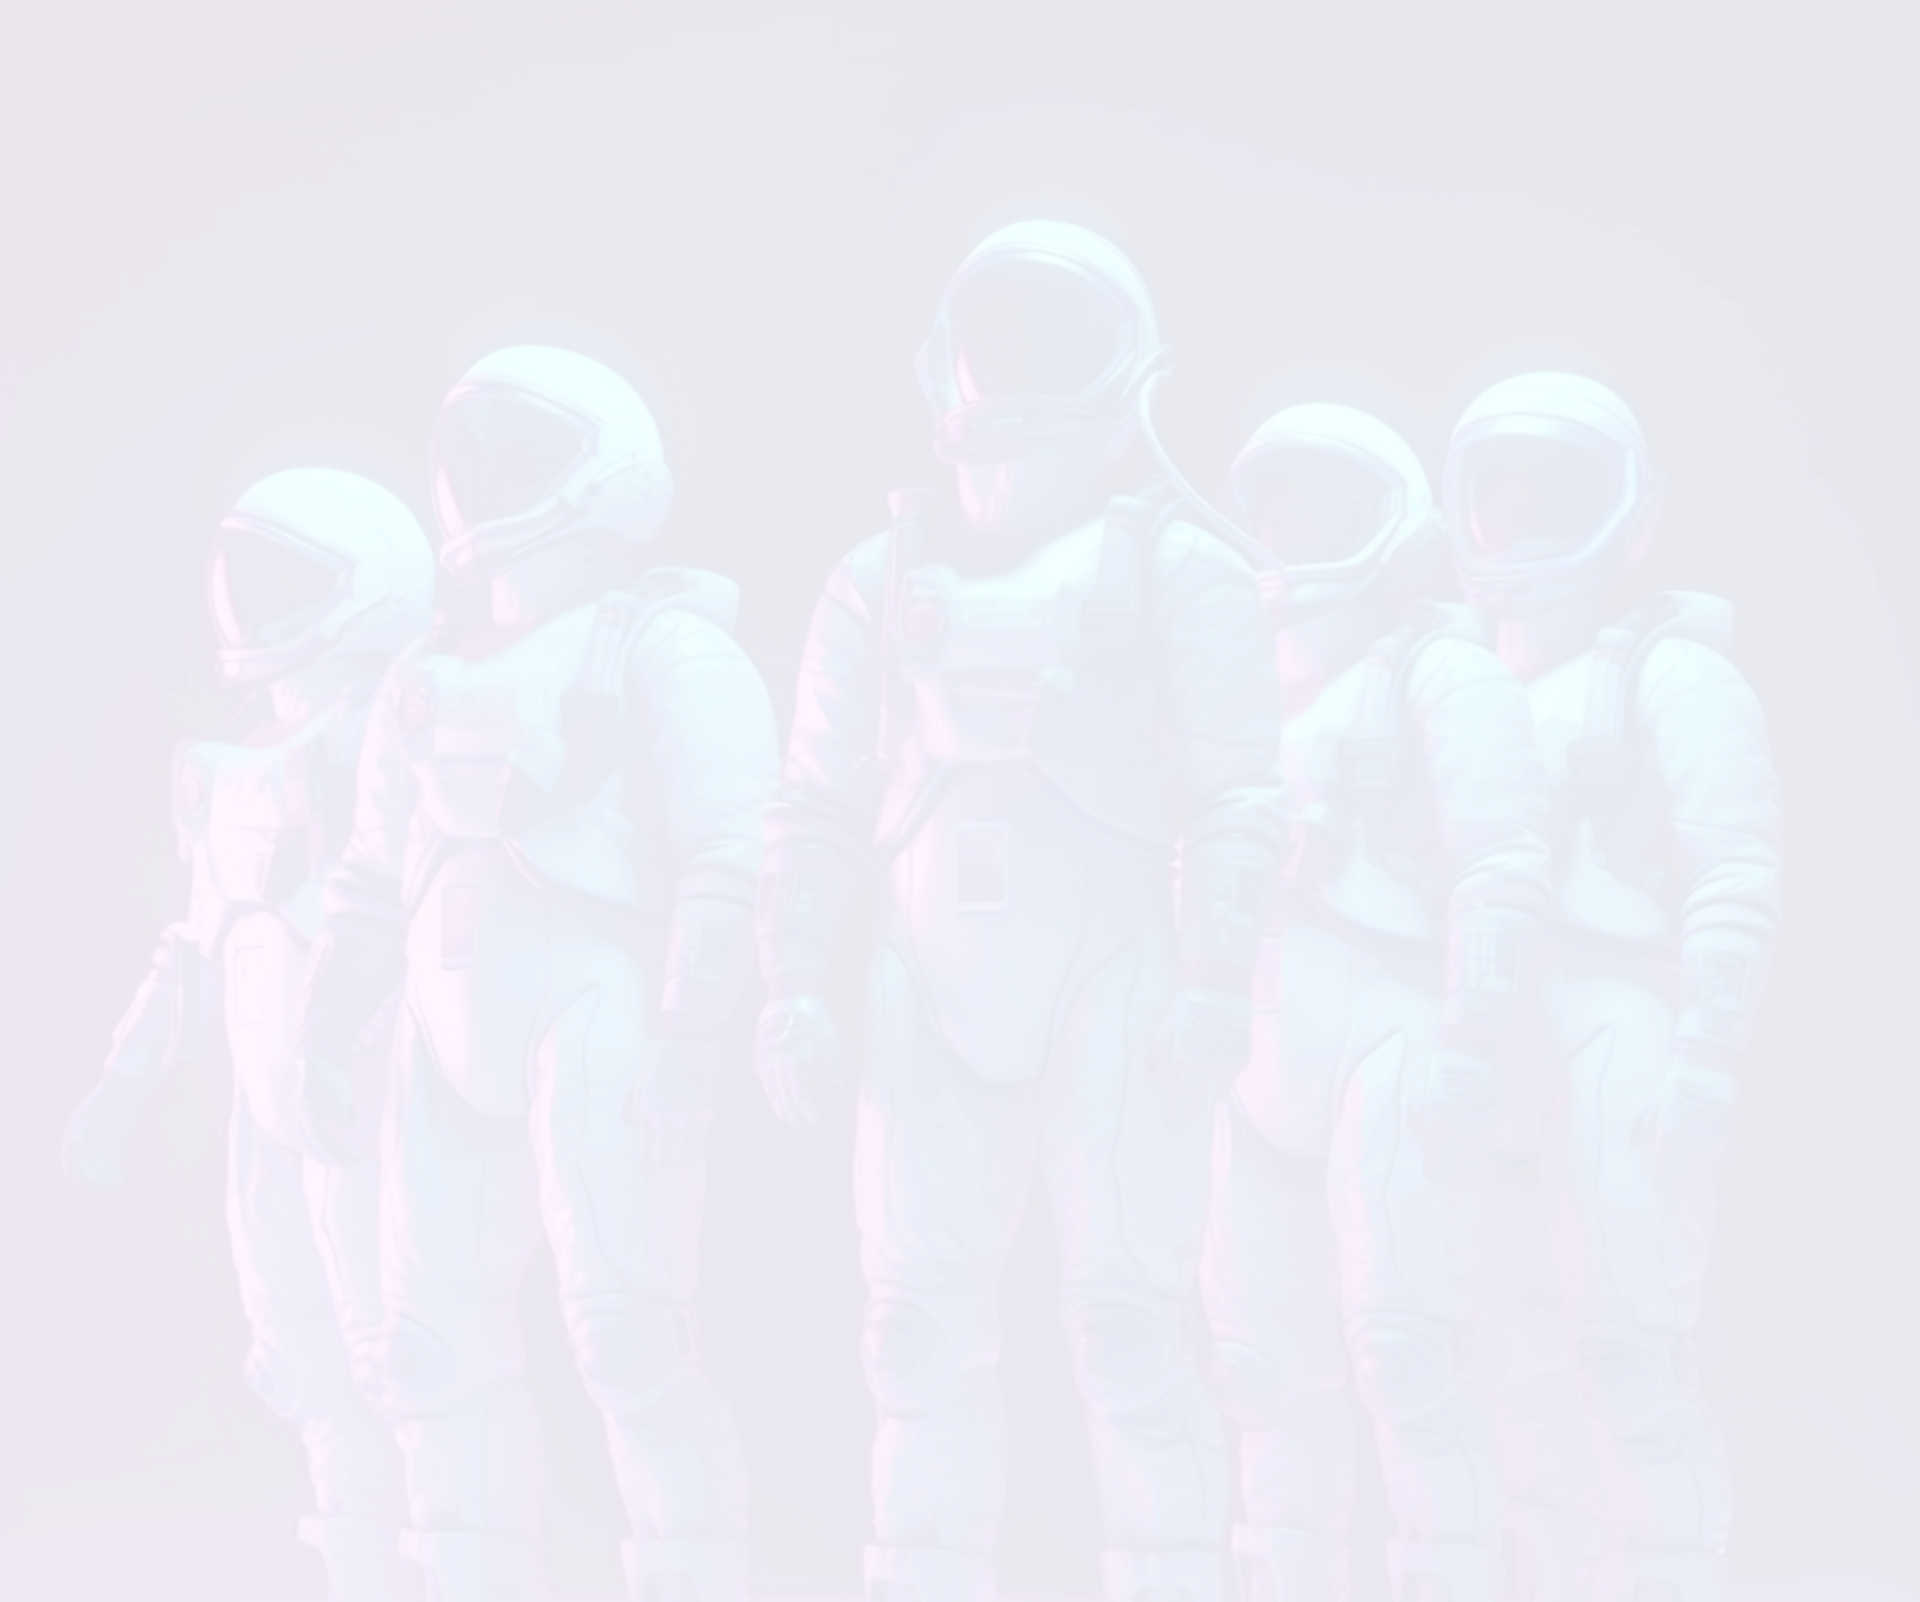 5 Astronauts standing in formation